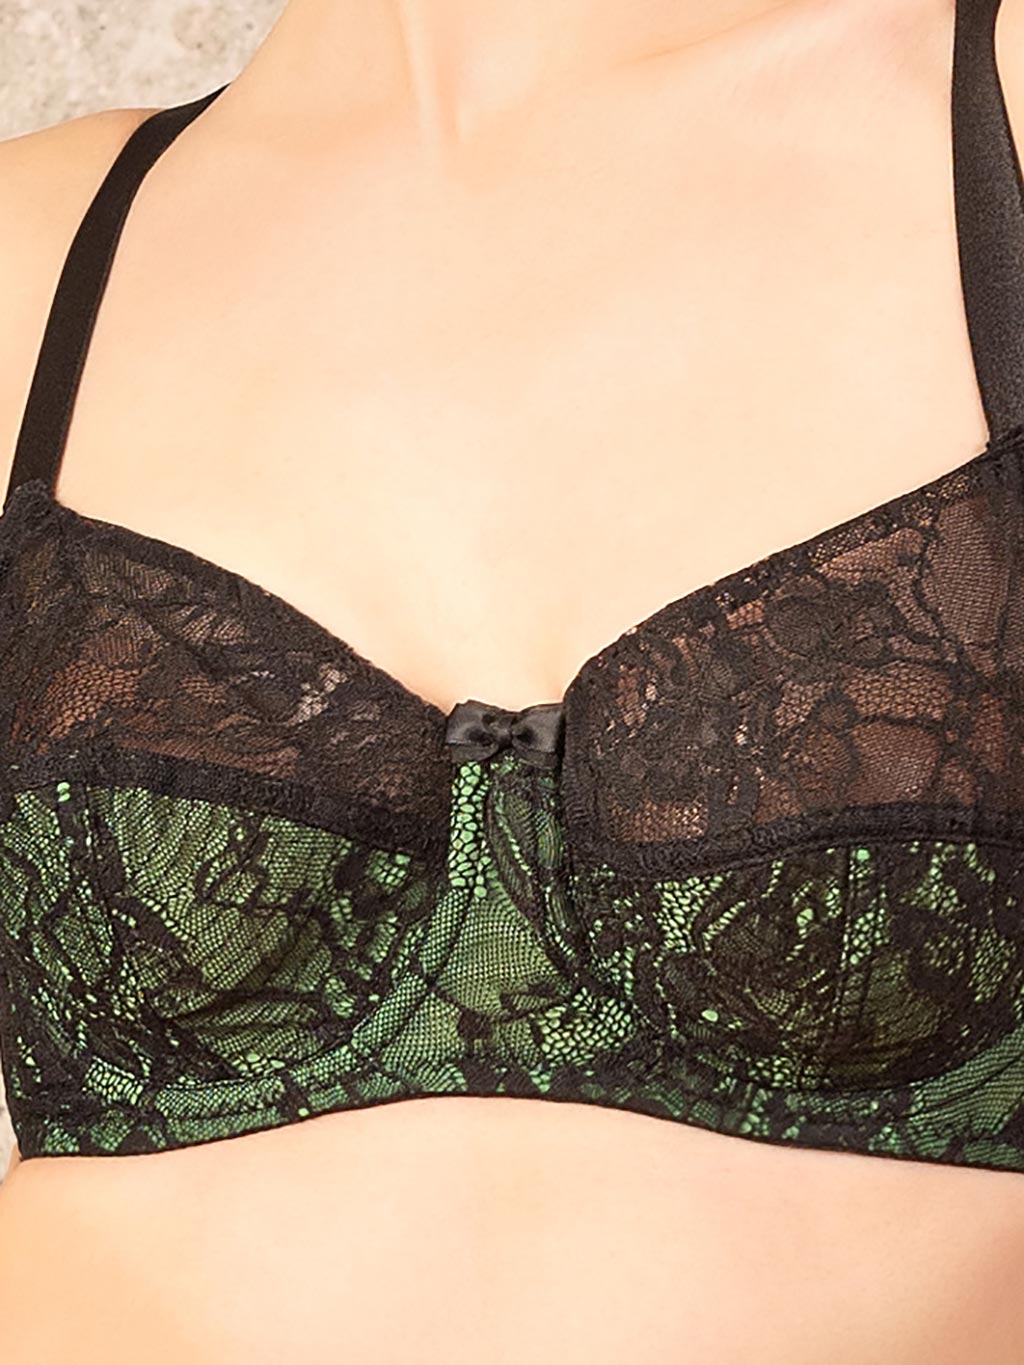 close up vintage green bra with black lace overlay 